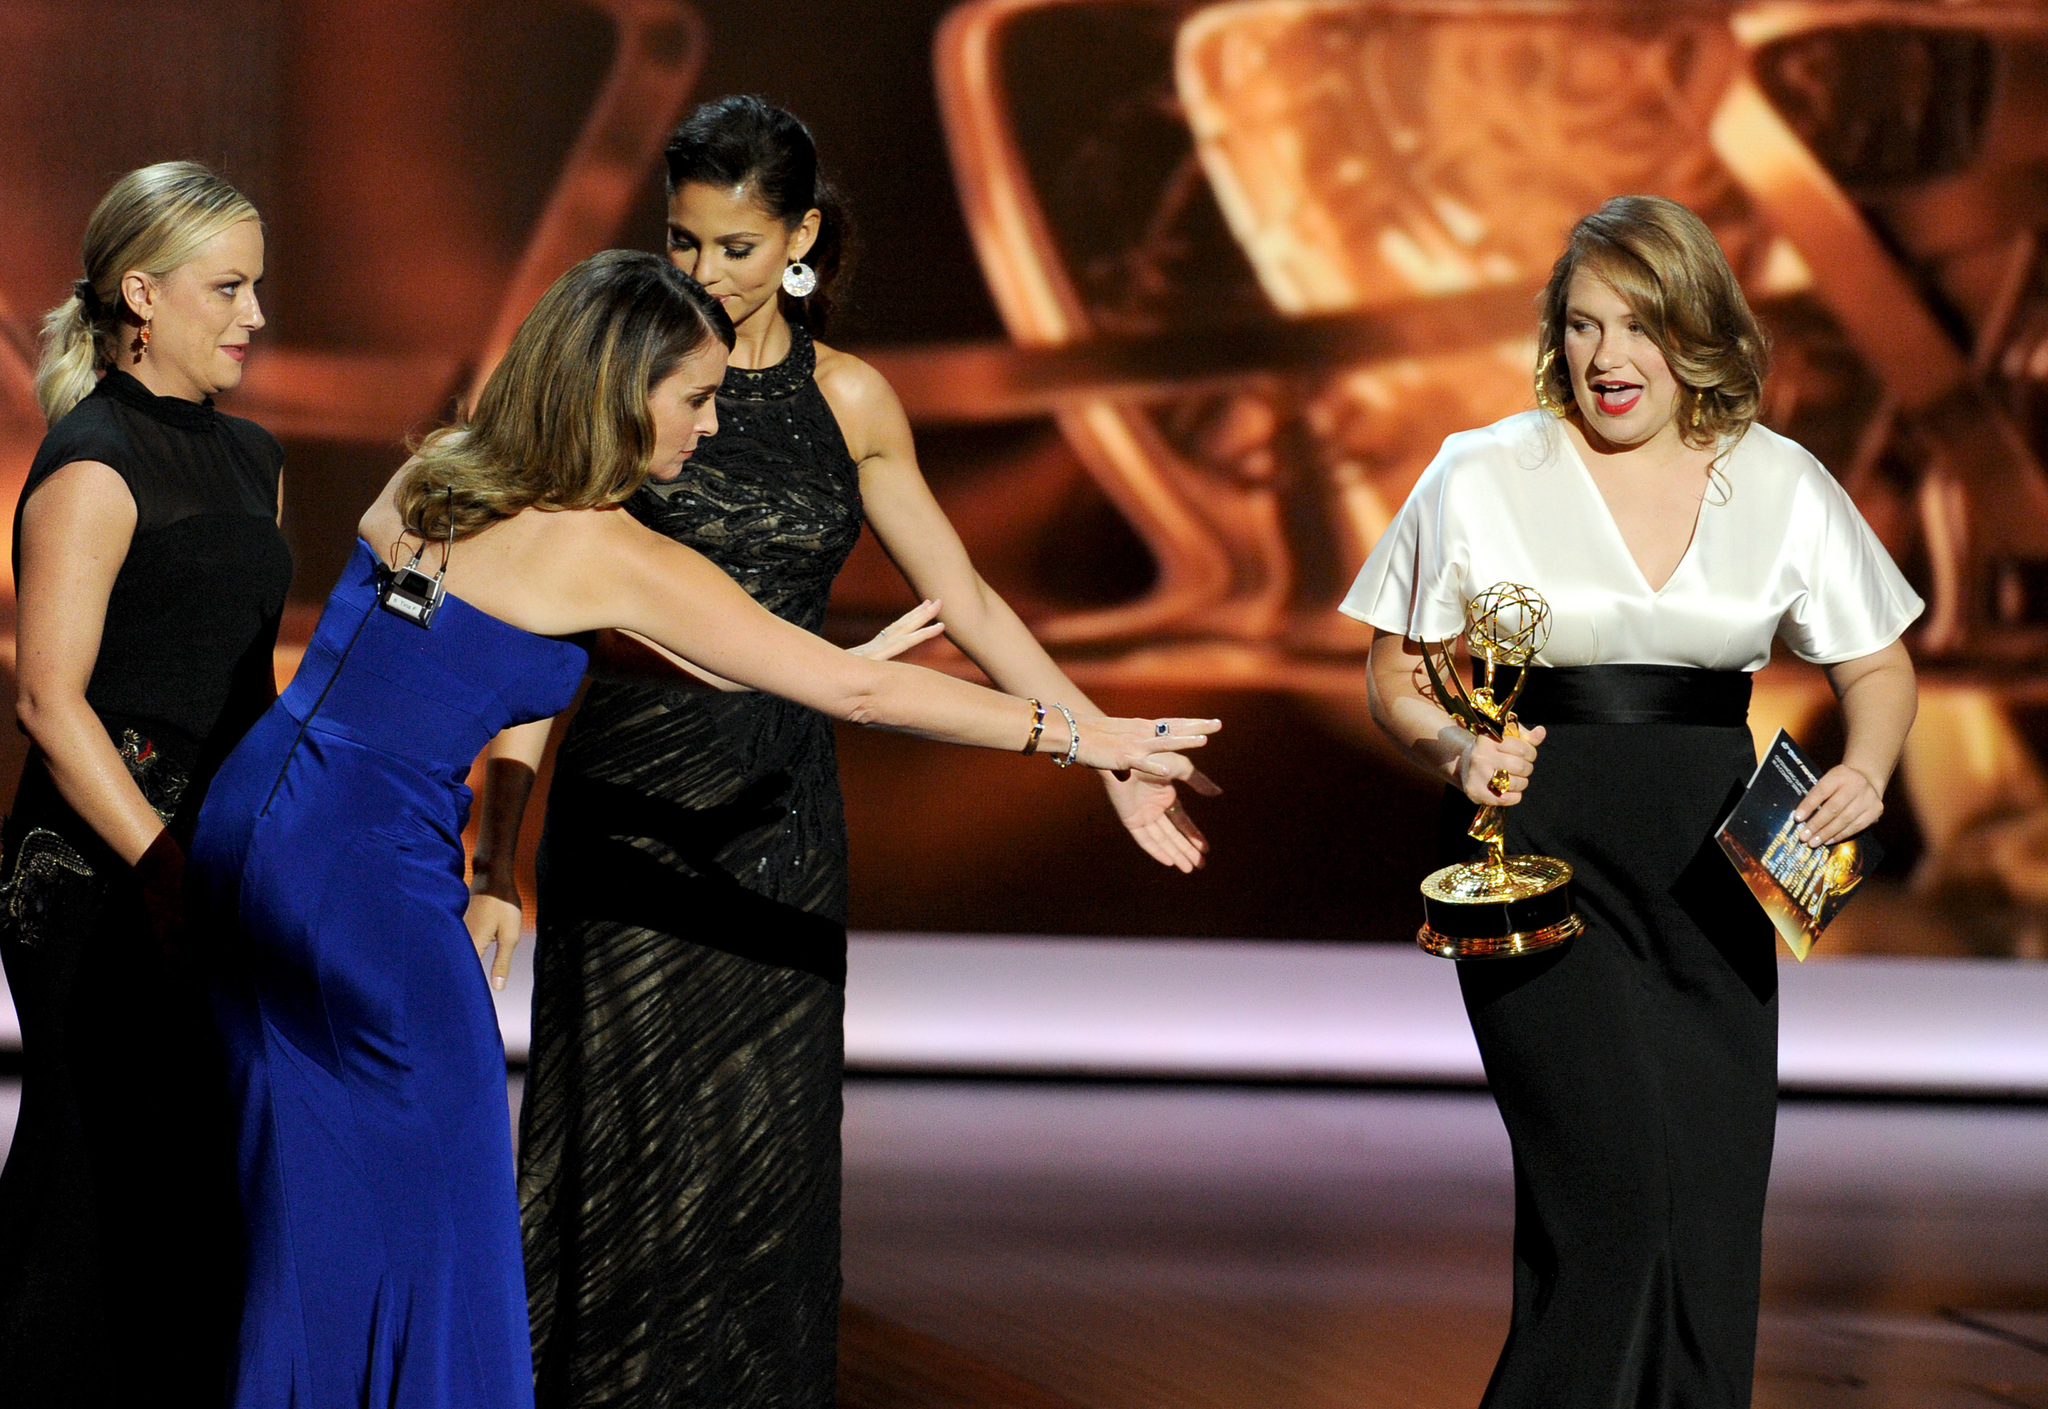 Tina Fey, Amy Poehler and Merritt Wever at event of The 65th Primetime Emmy Awards (2013)